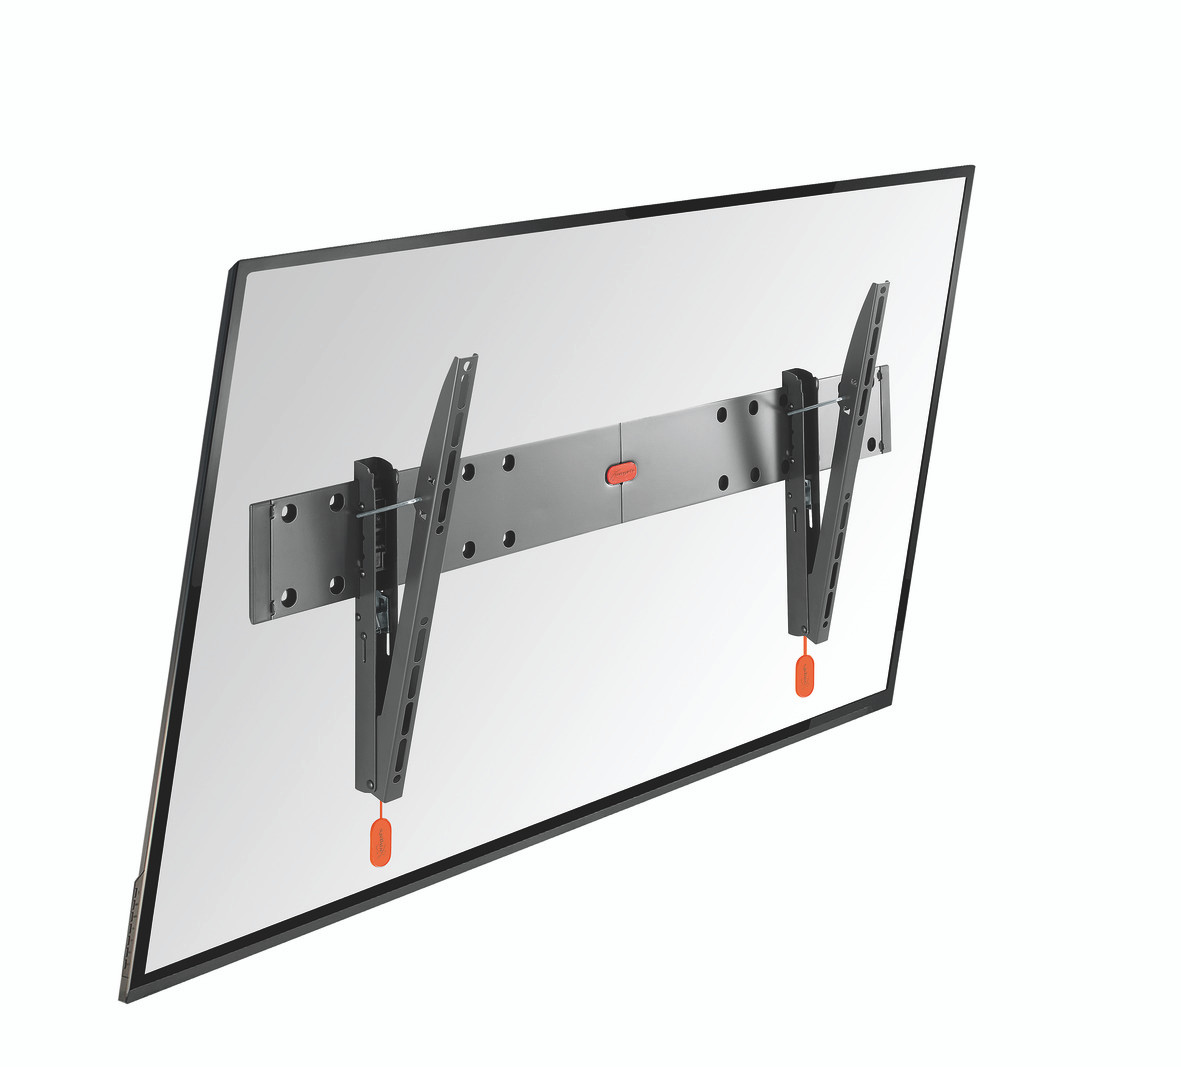 An image of Vogel's Base 15 L Wall Mount for Plasma / LCD / TV 40-65